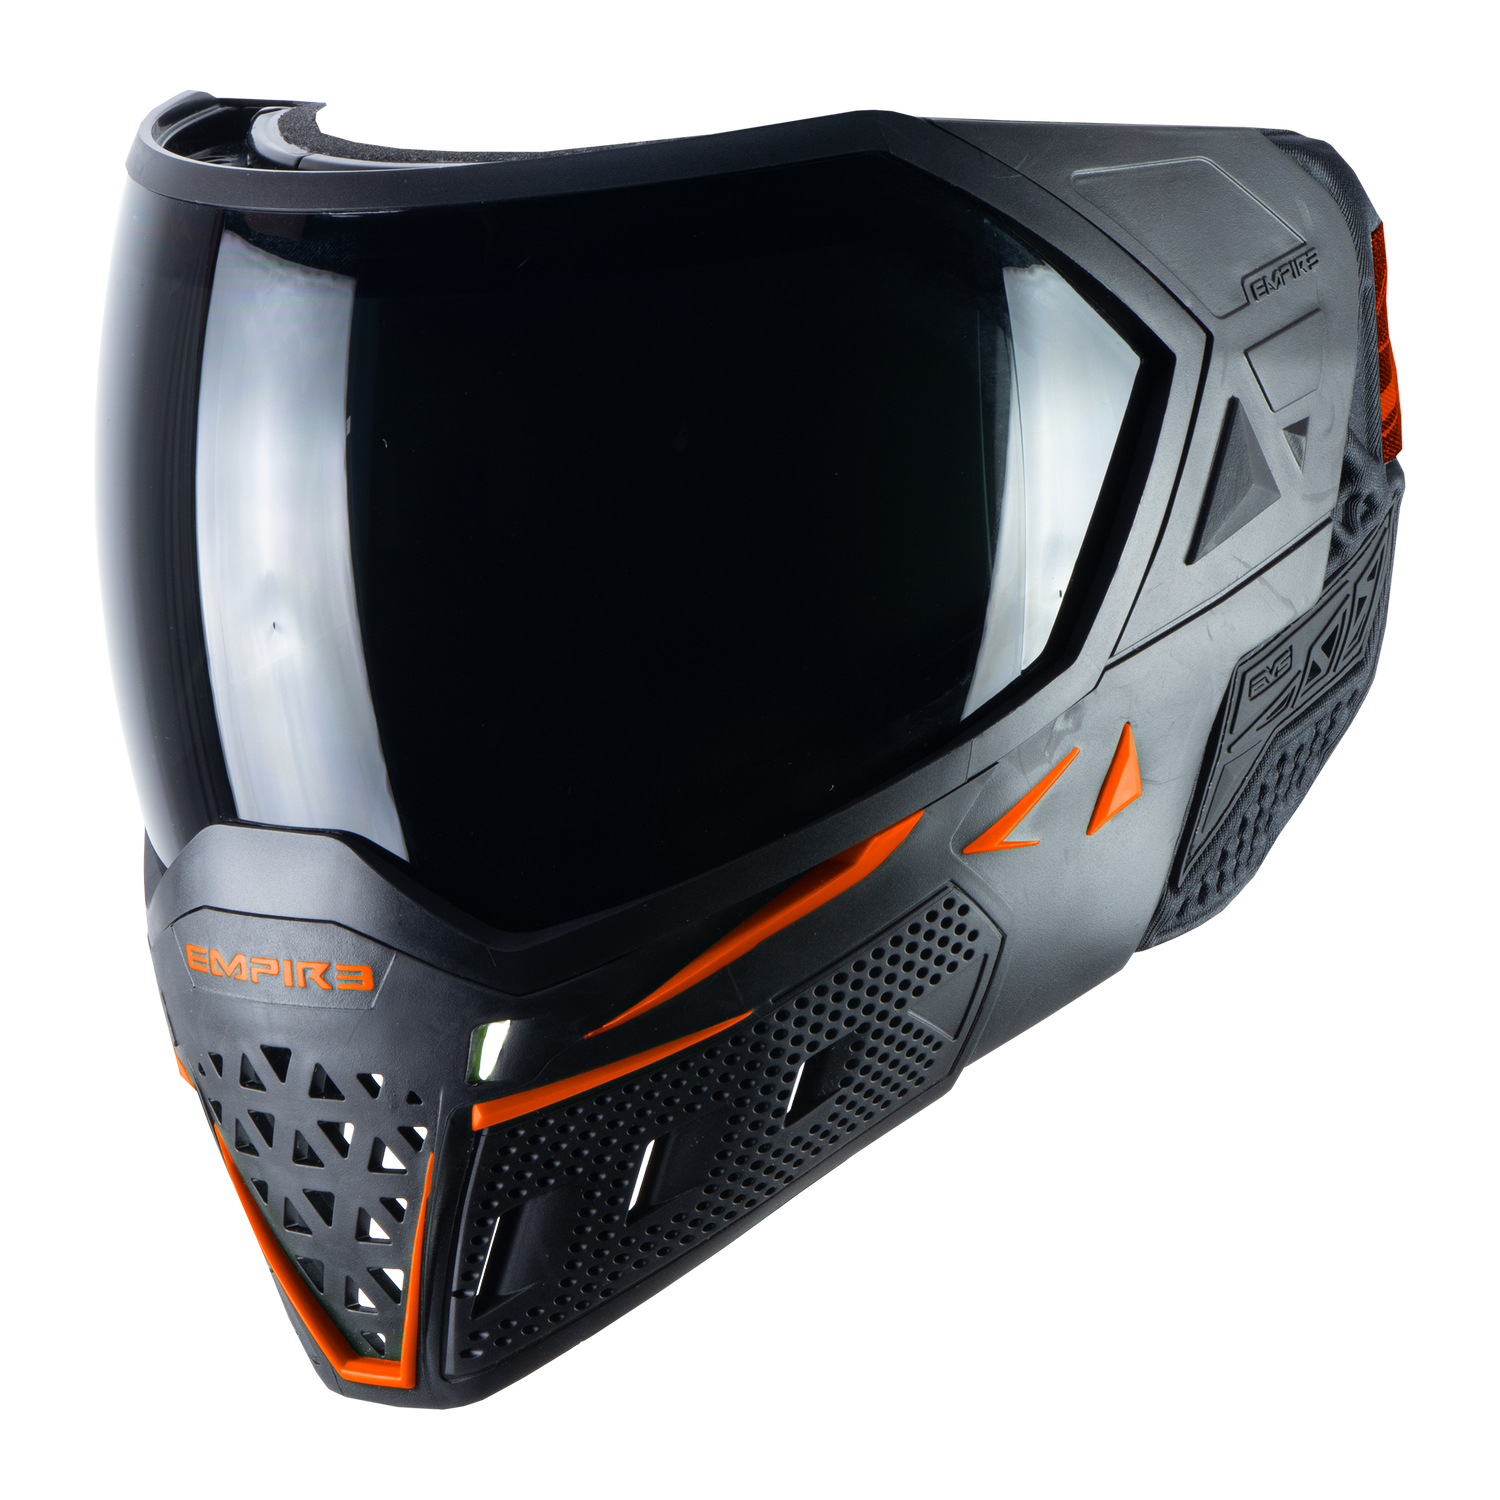  Orange - Thermal Ninja Lens - Eminent Paintball And Airsoft